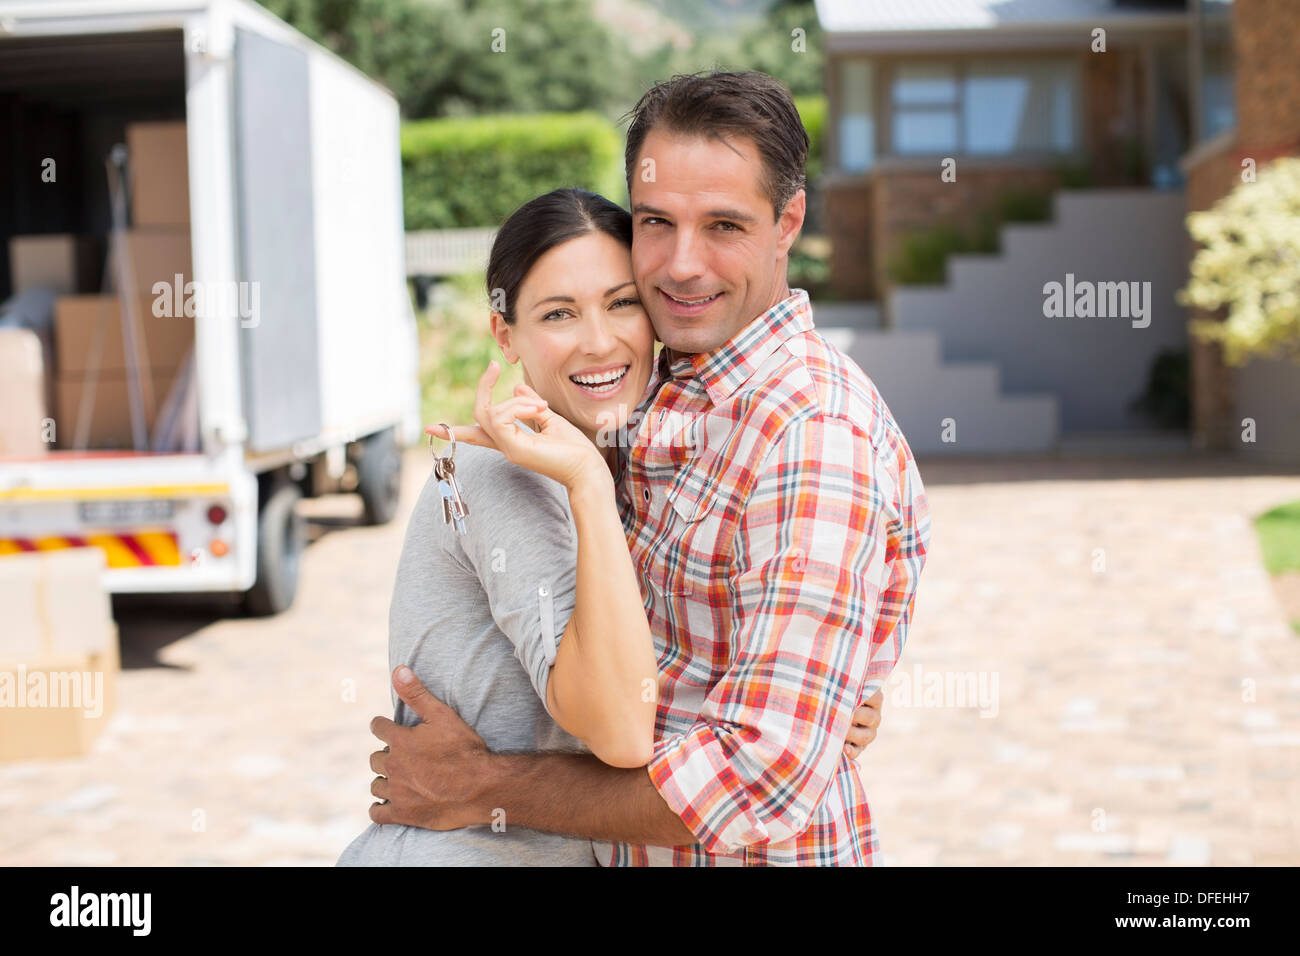 Portrait of smiling couple in front of new house Stock Photo